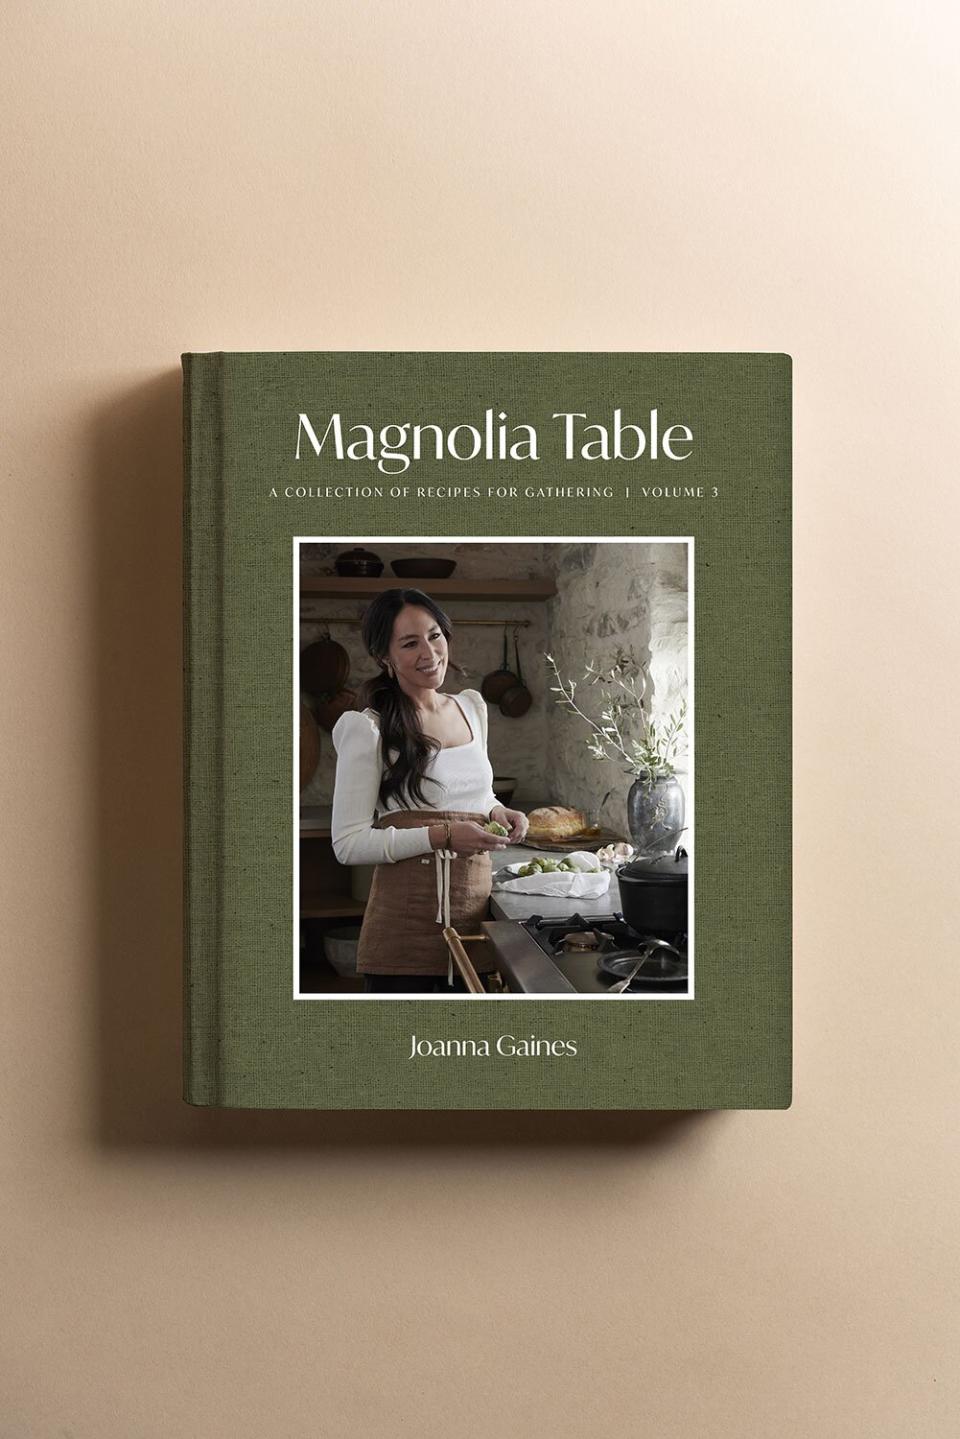 Joanna Gaines to release her third cookbook